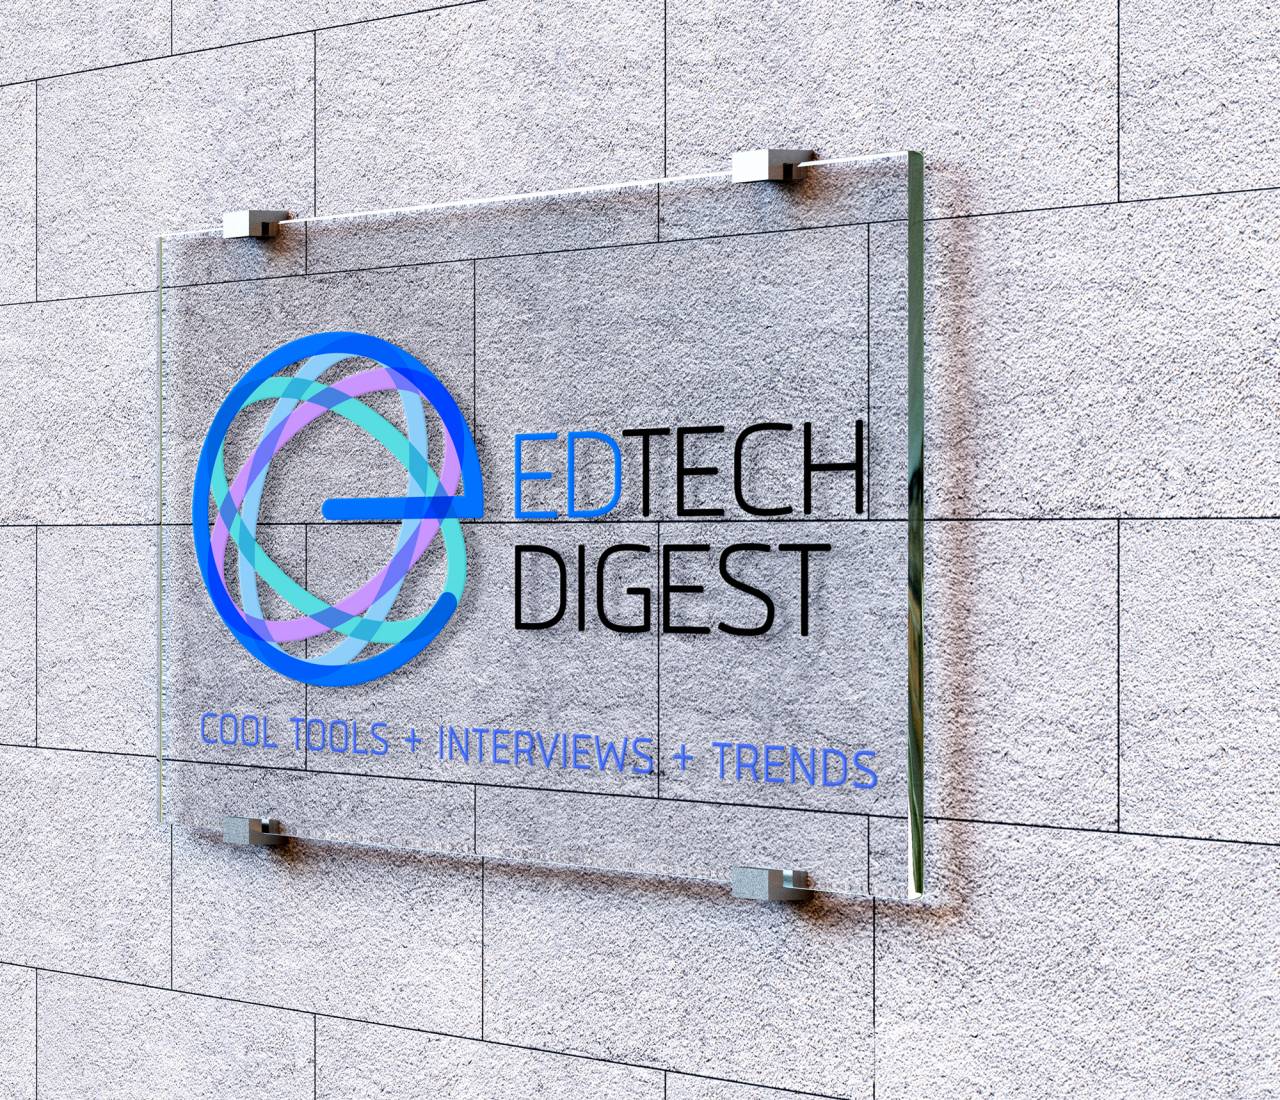 External Signage, when to rebrand, edtechdigest and David Brier